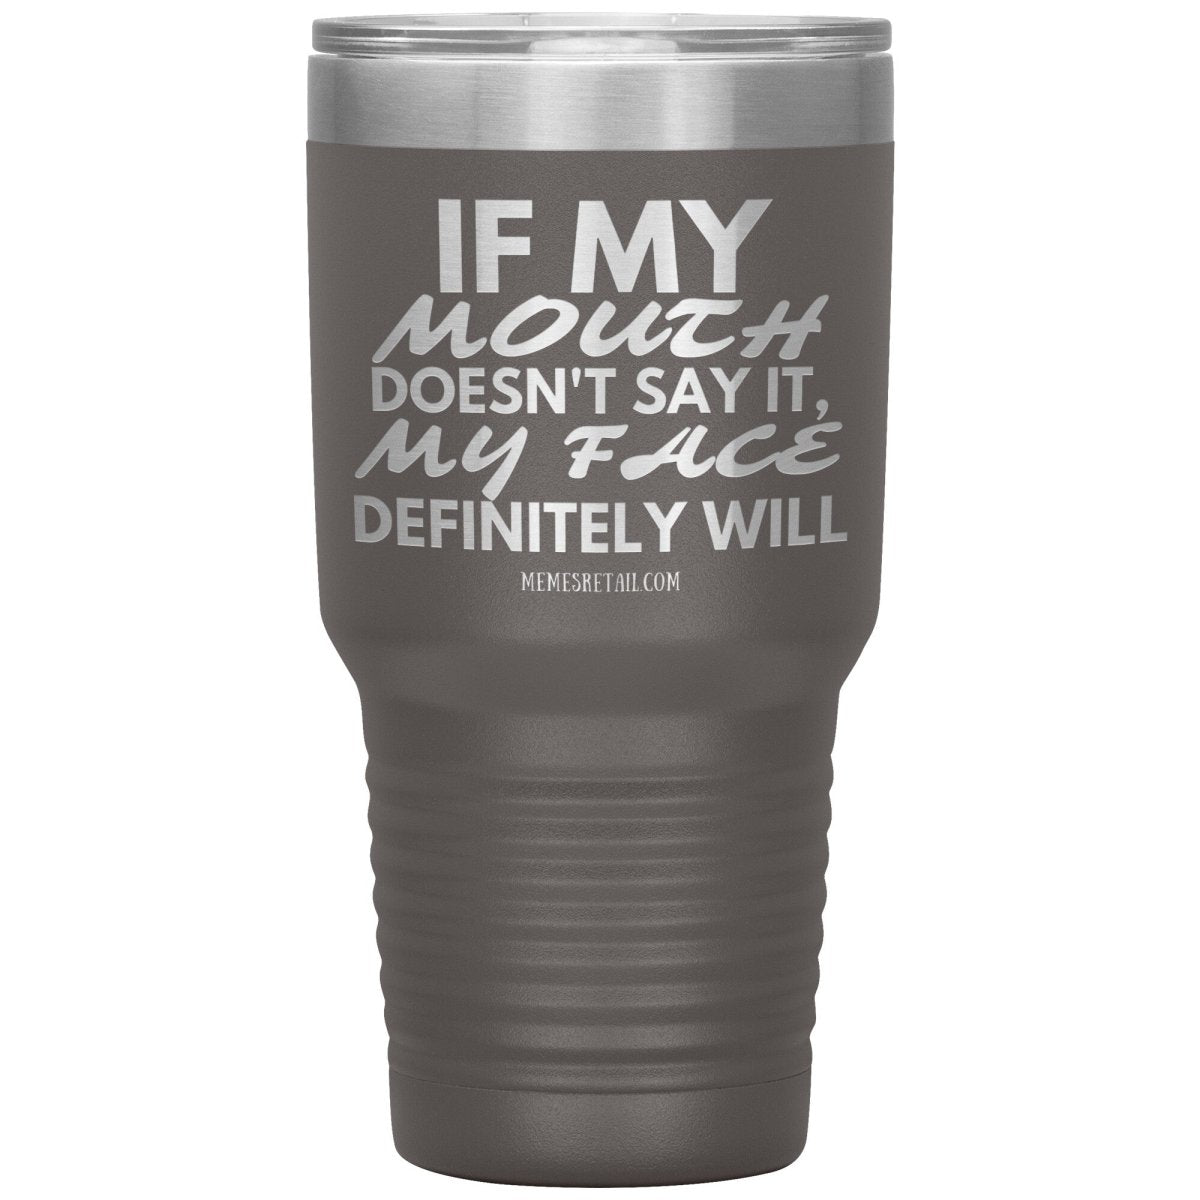 If my mouth doesn't say it, my face definitely will Tumblers, 30oz Insulated Tumbler / Pewter - MemesRetail.com